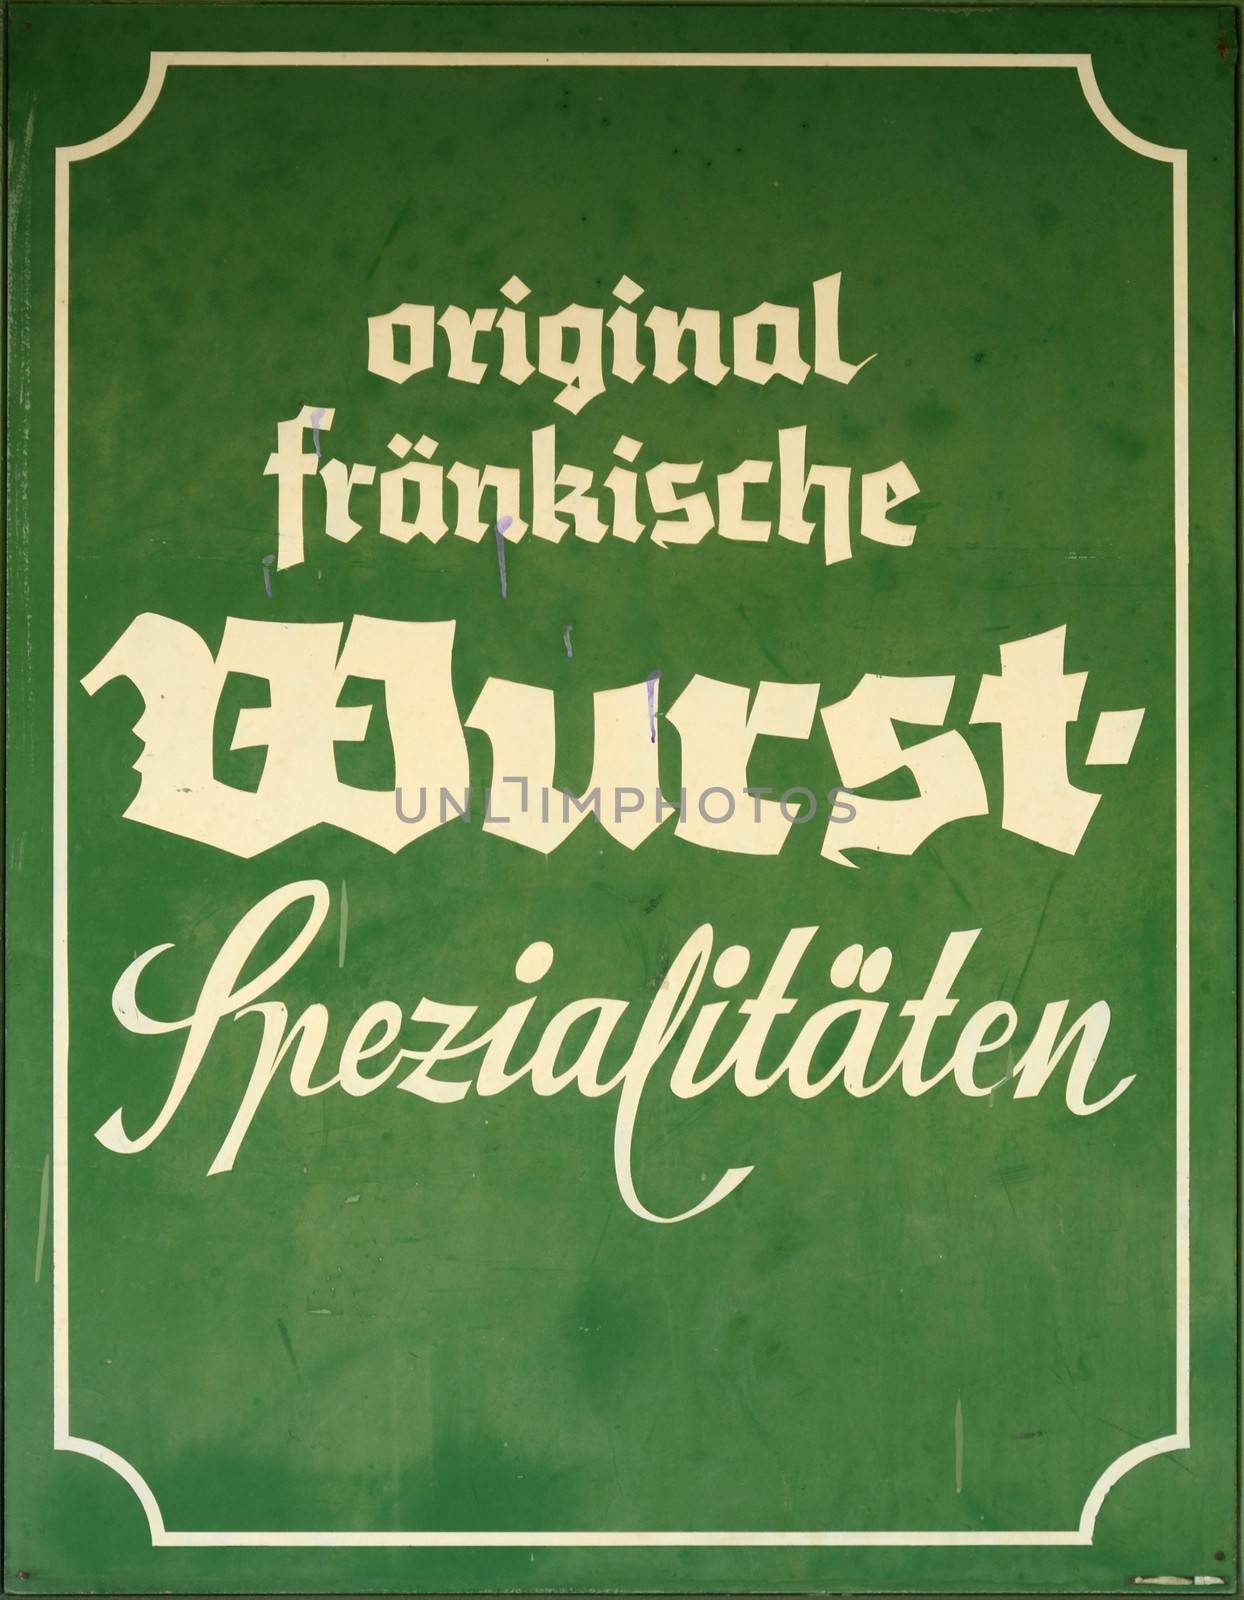 A Sign For Famous Specialist German Sausages (Wurst)